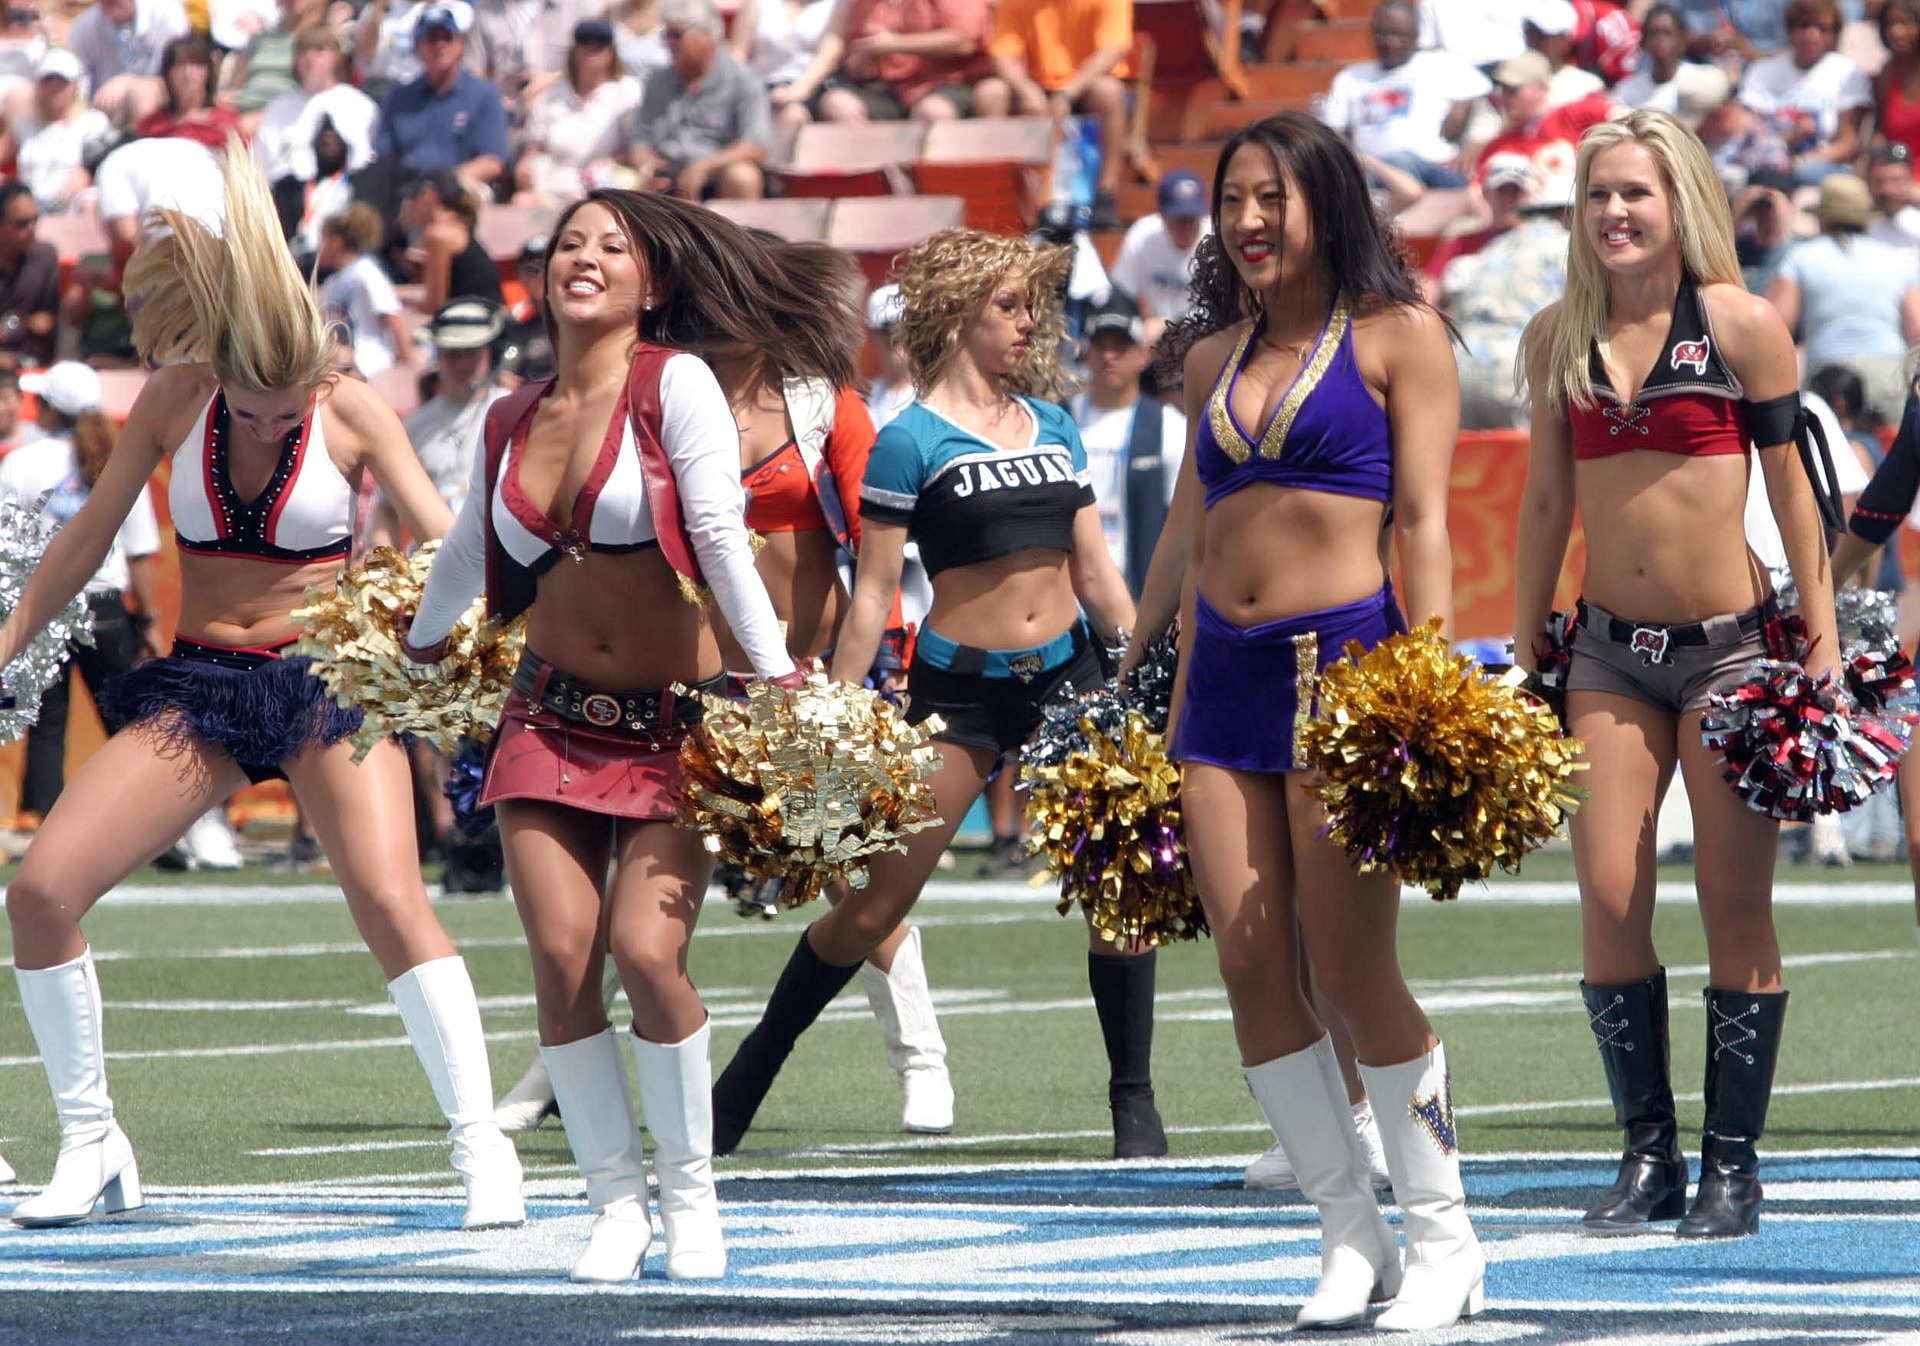 Do you know How to Choose the Best Cheerleading Uniform?